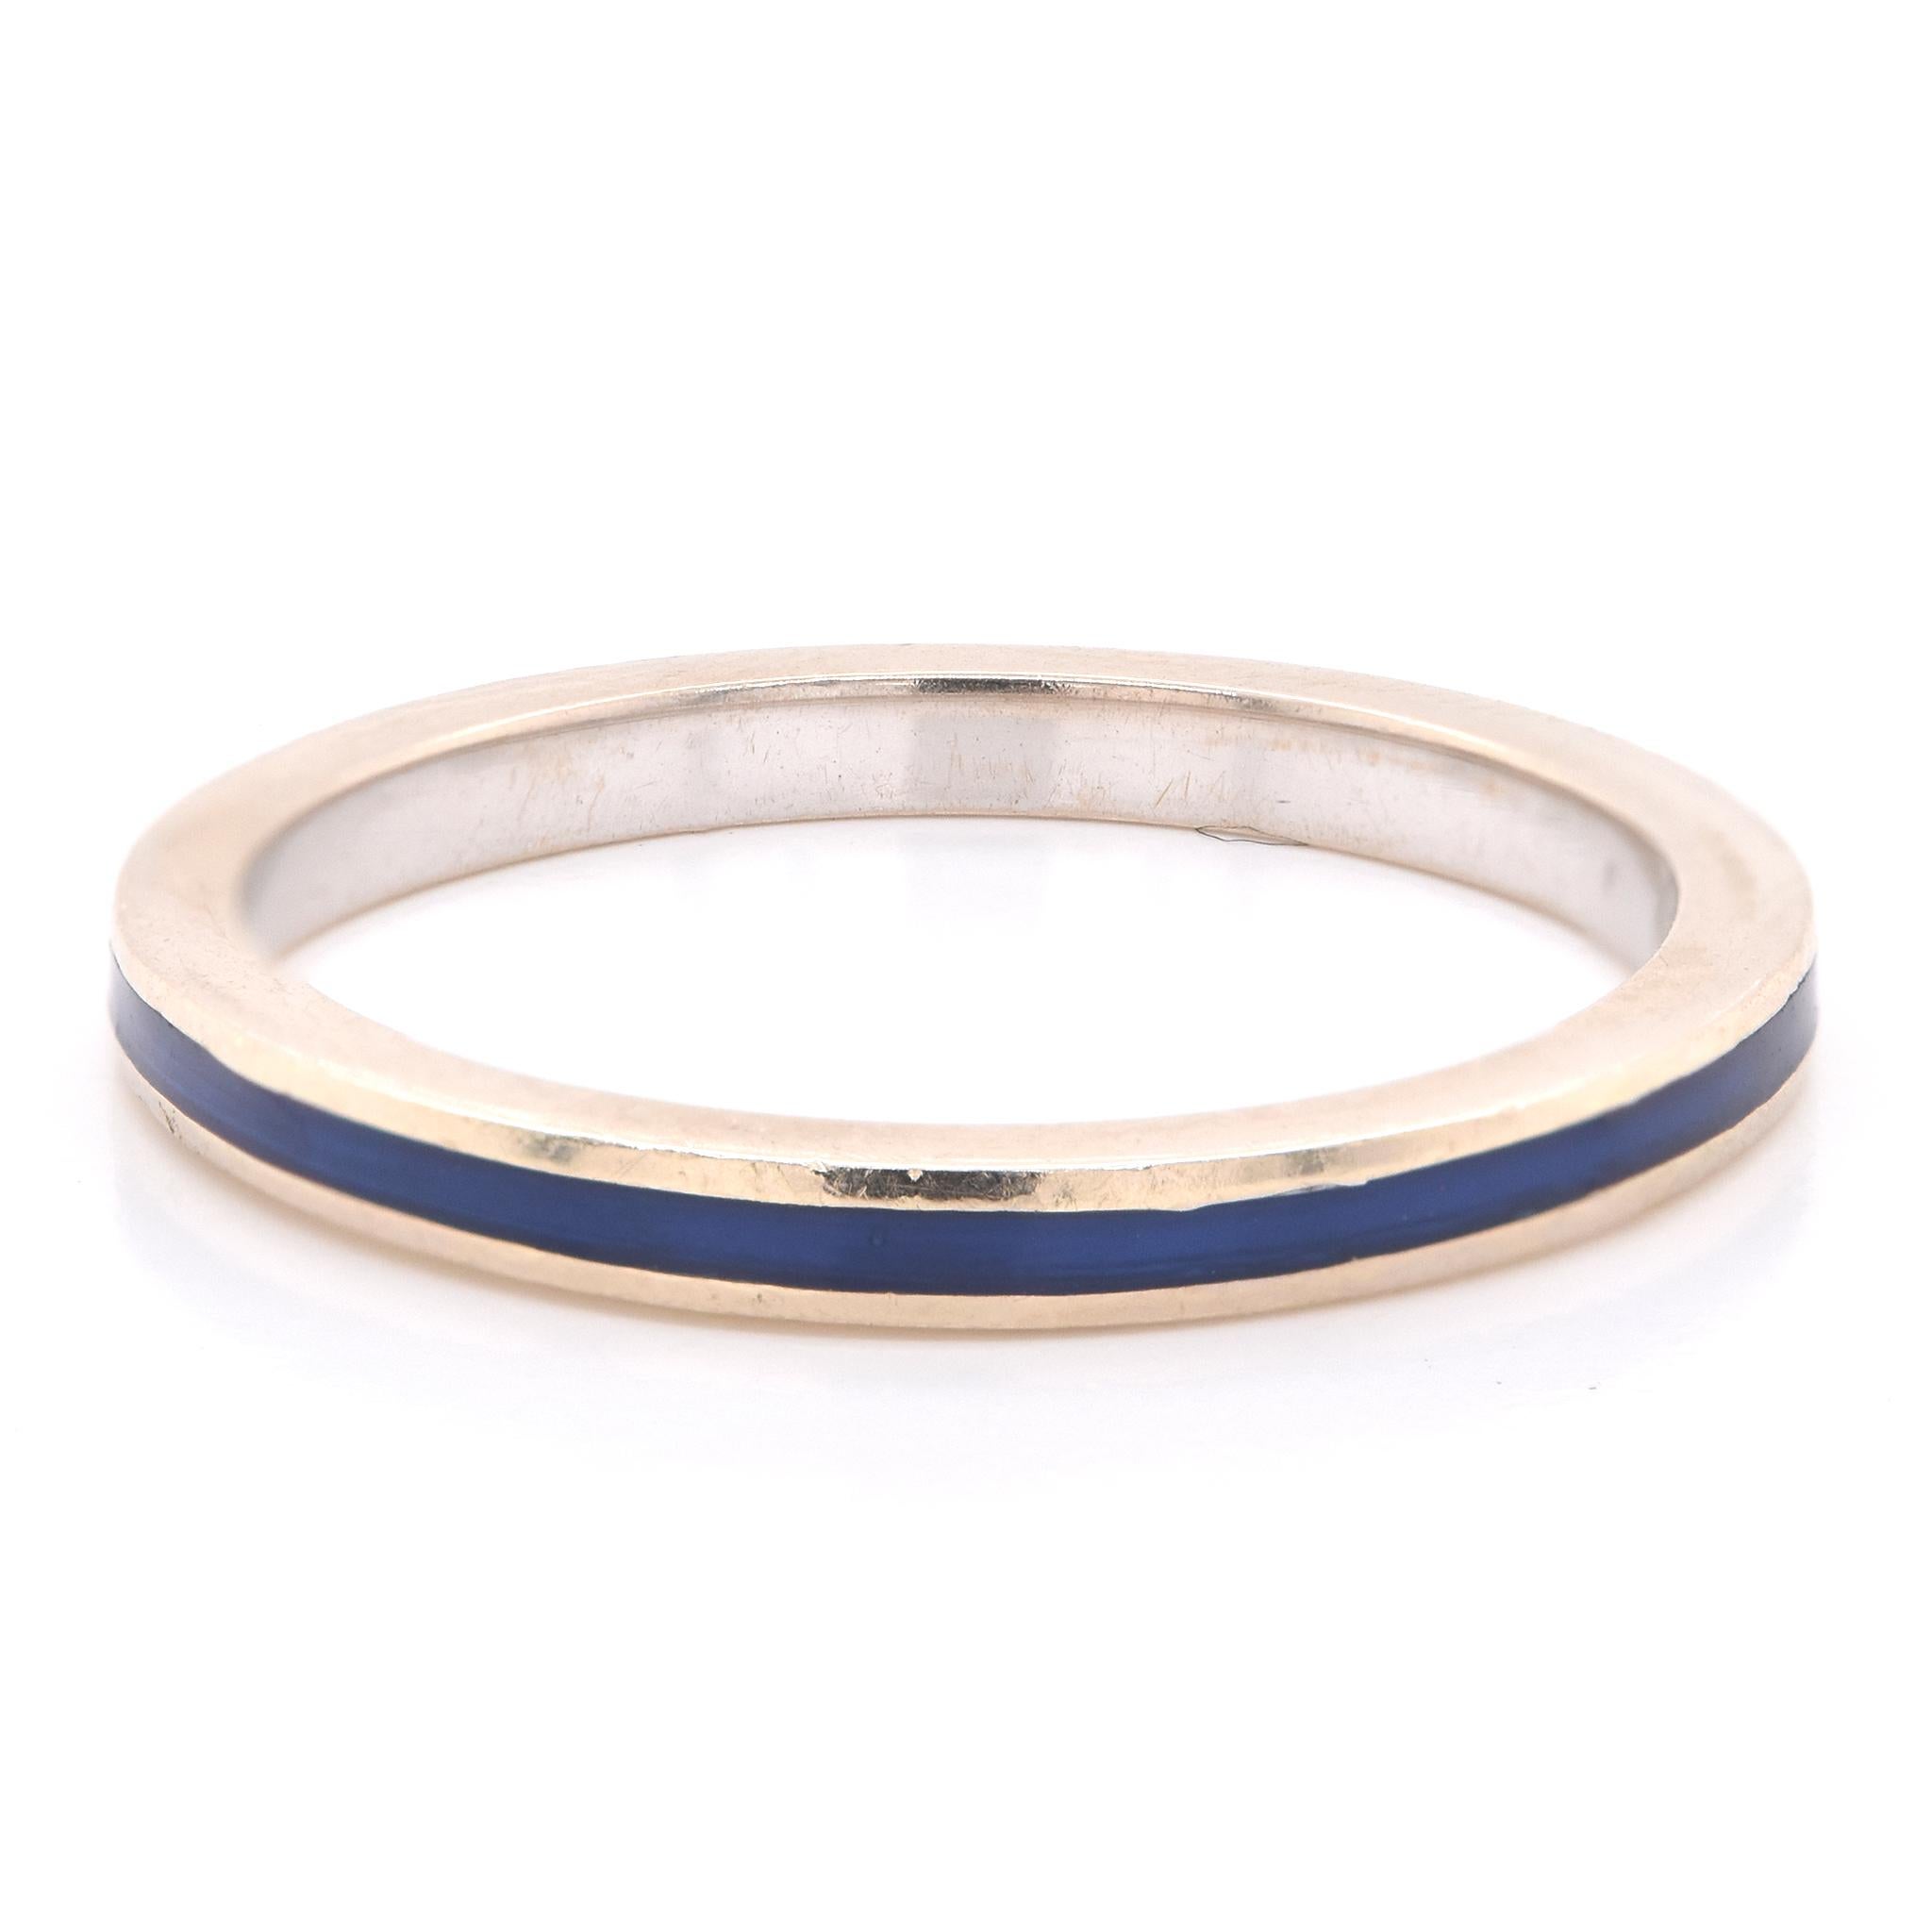 Designer: Hidalgo
Material: 18k white gold and blue enamel
Dimensions: band measures 1.95mm in width
Weight: 2.0 grams